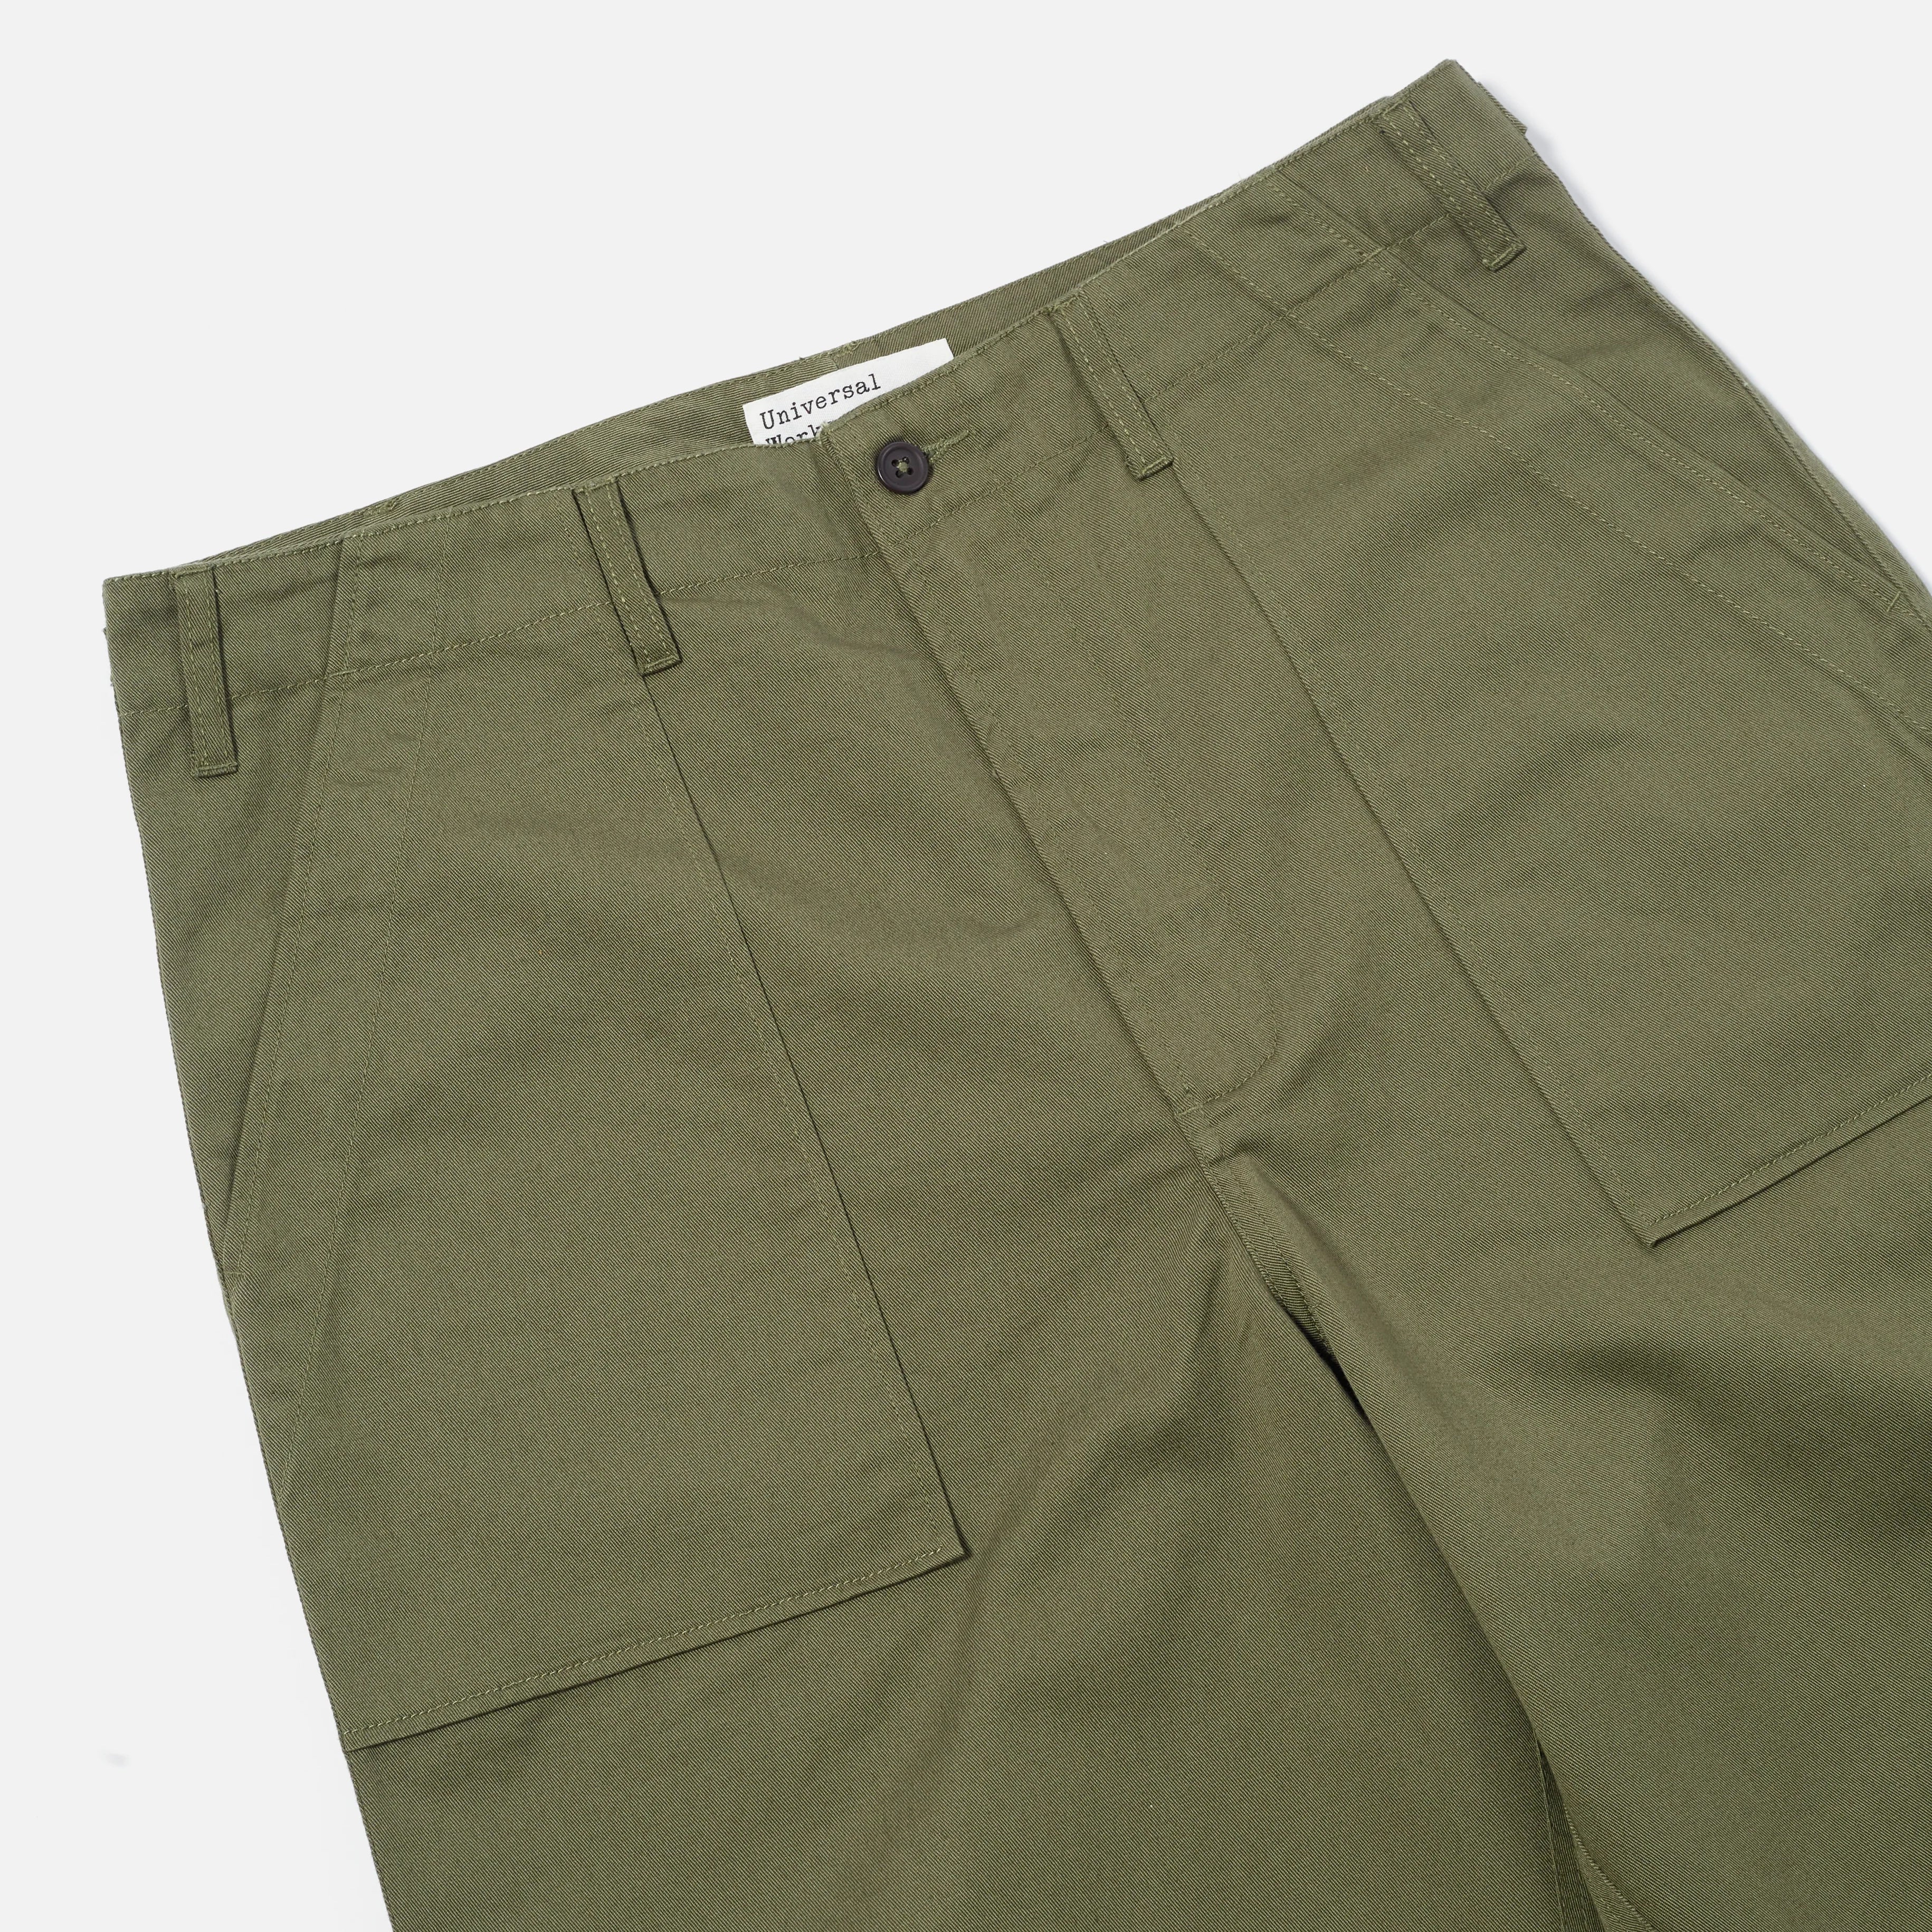 Fatigue Pant - Light Olive Twill